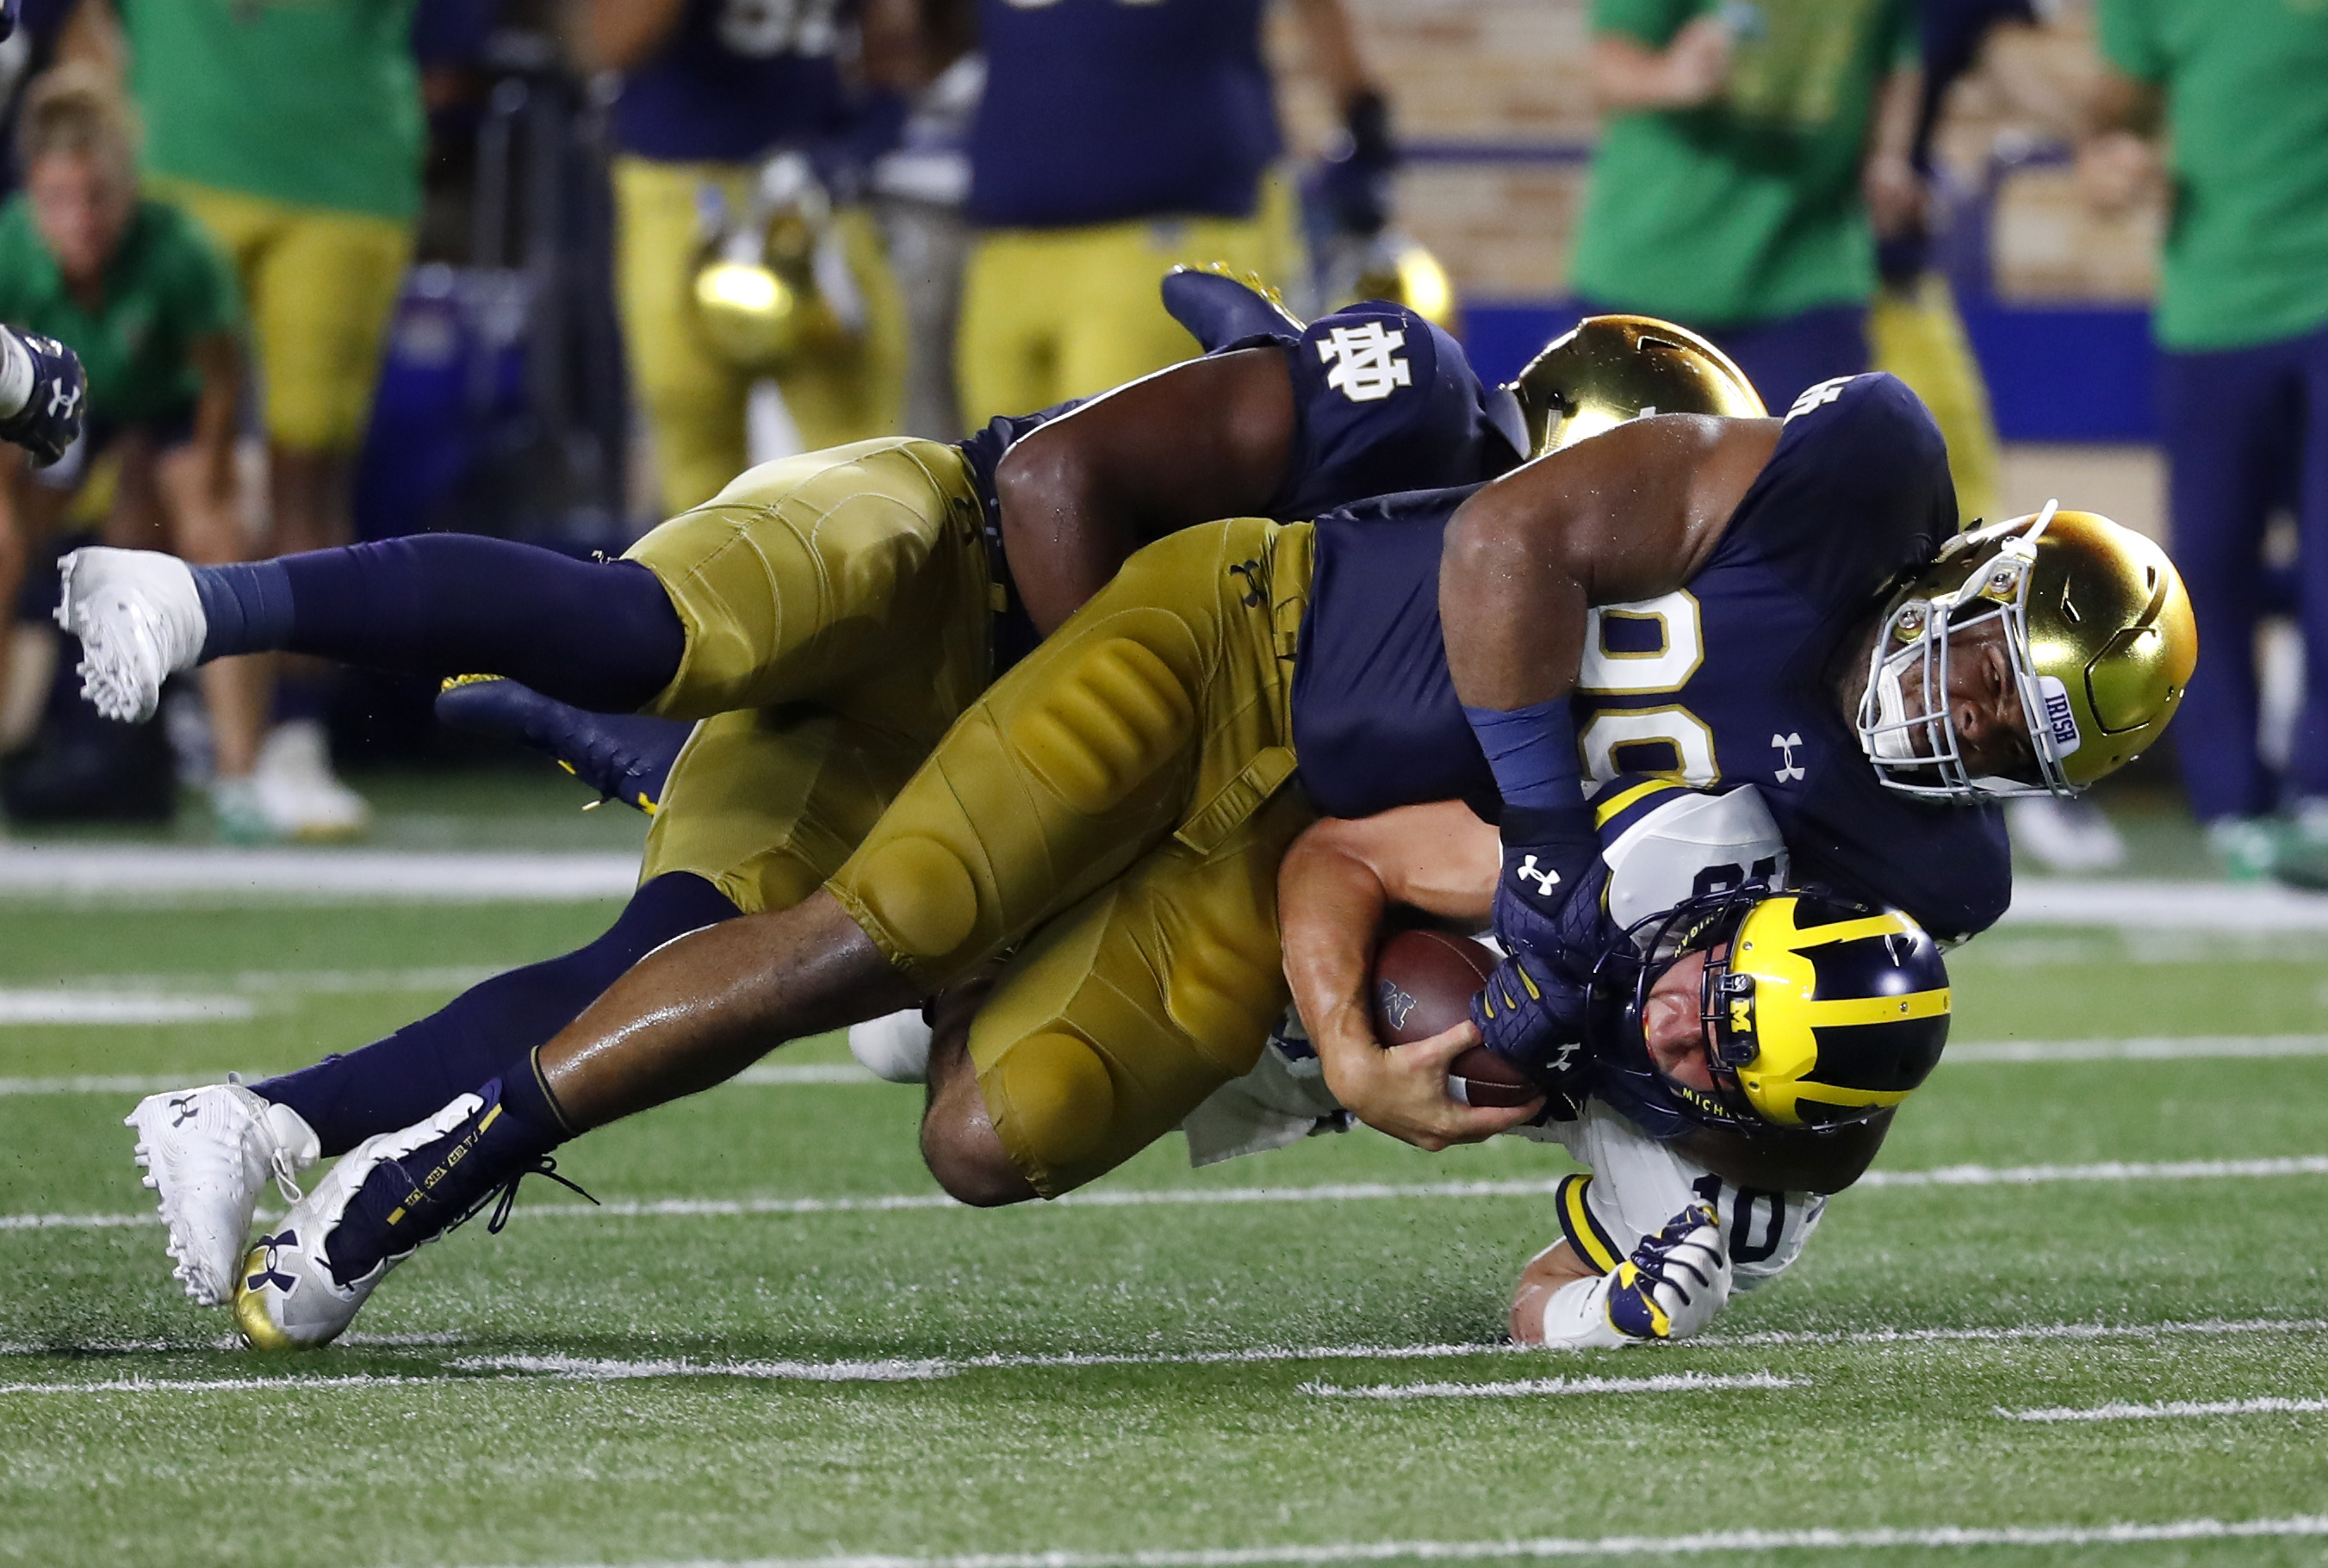 Notre Dame's Kelly likes what he sees in Lea, defense